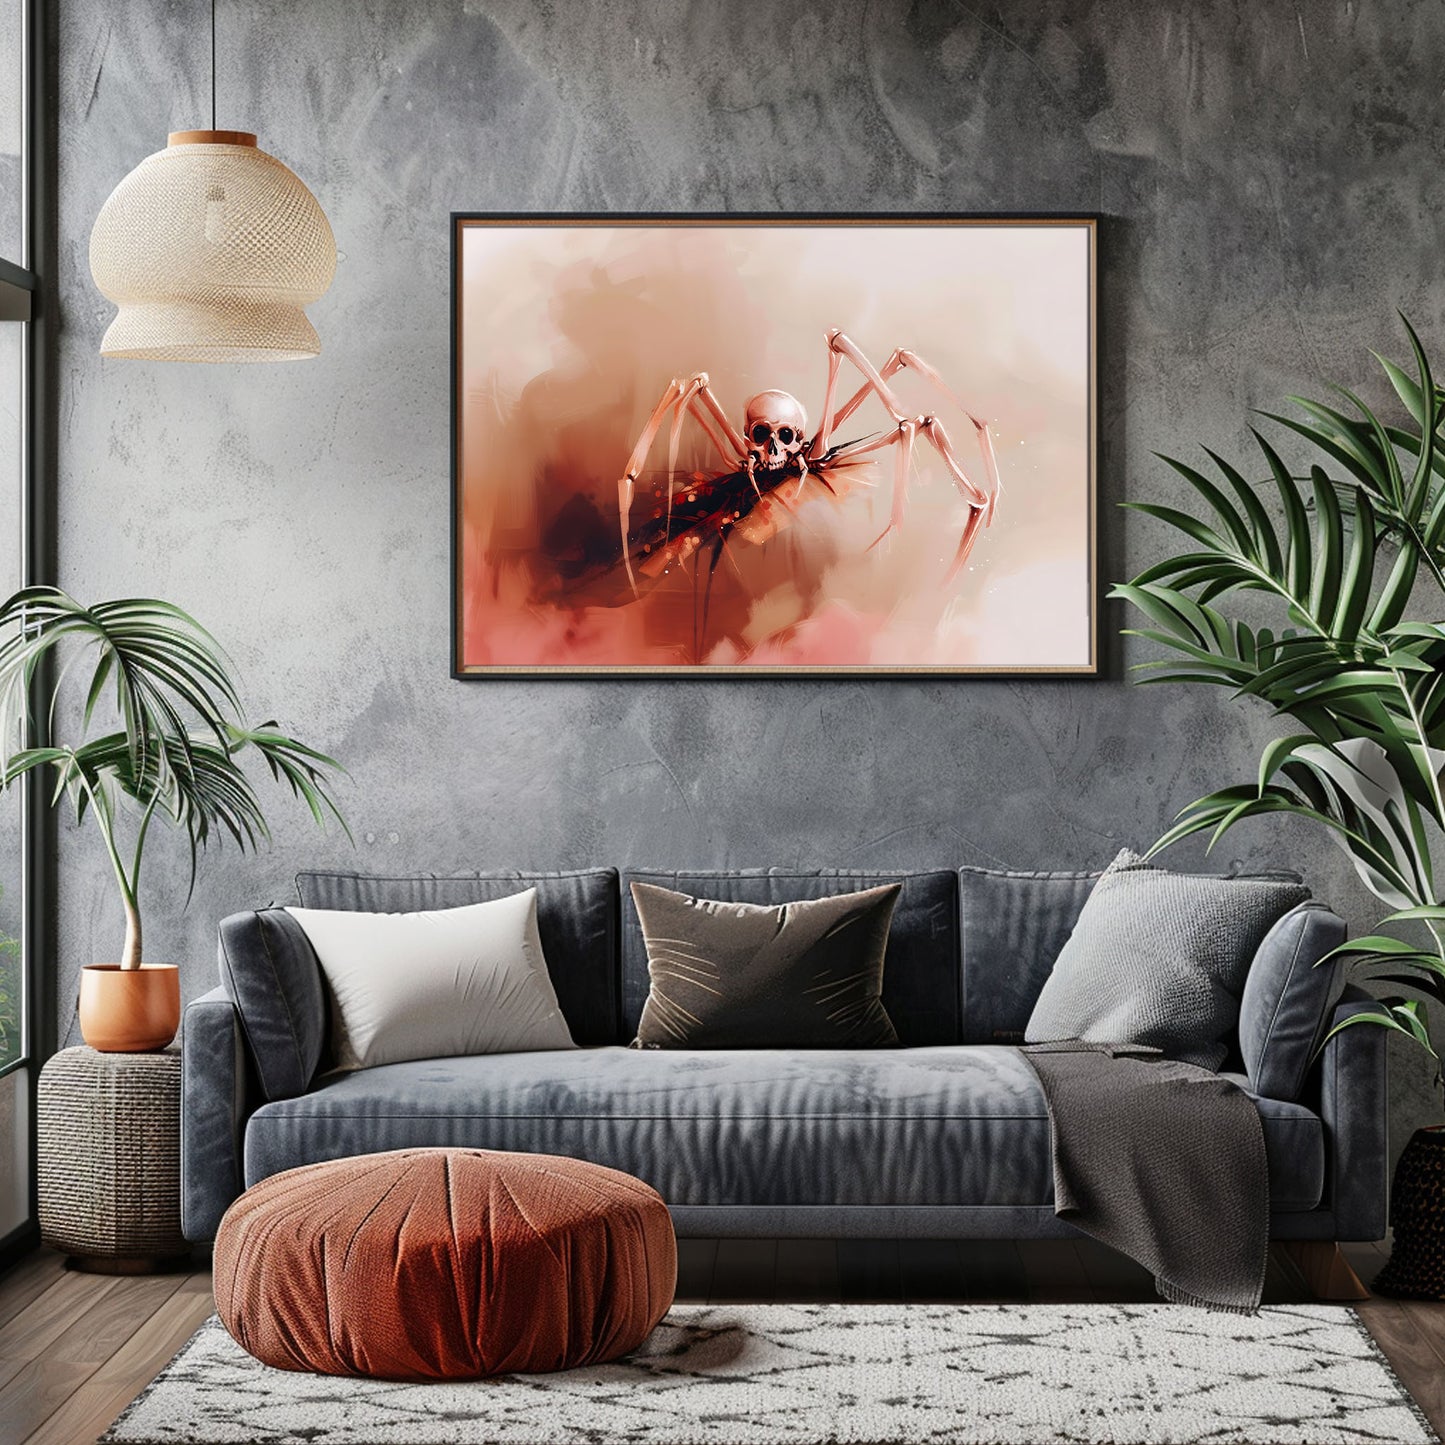 Coral Skeletal Spider Painting - Warm Color Wall Art for Creepy Beauty